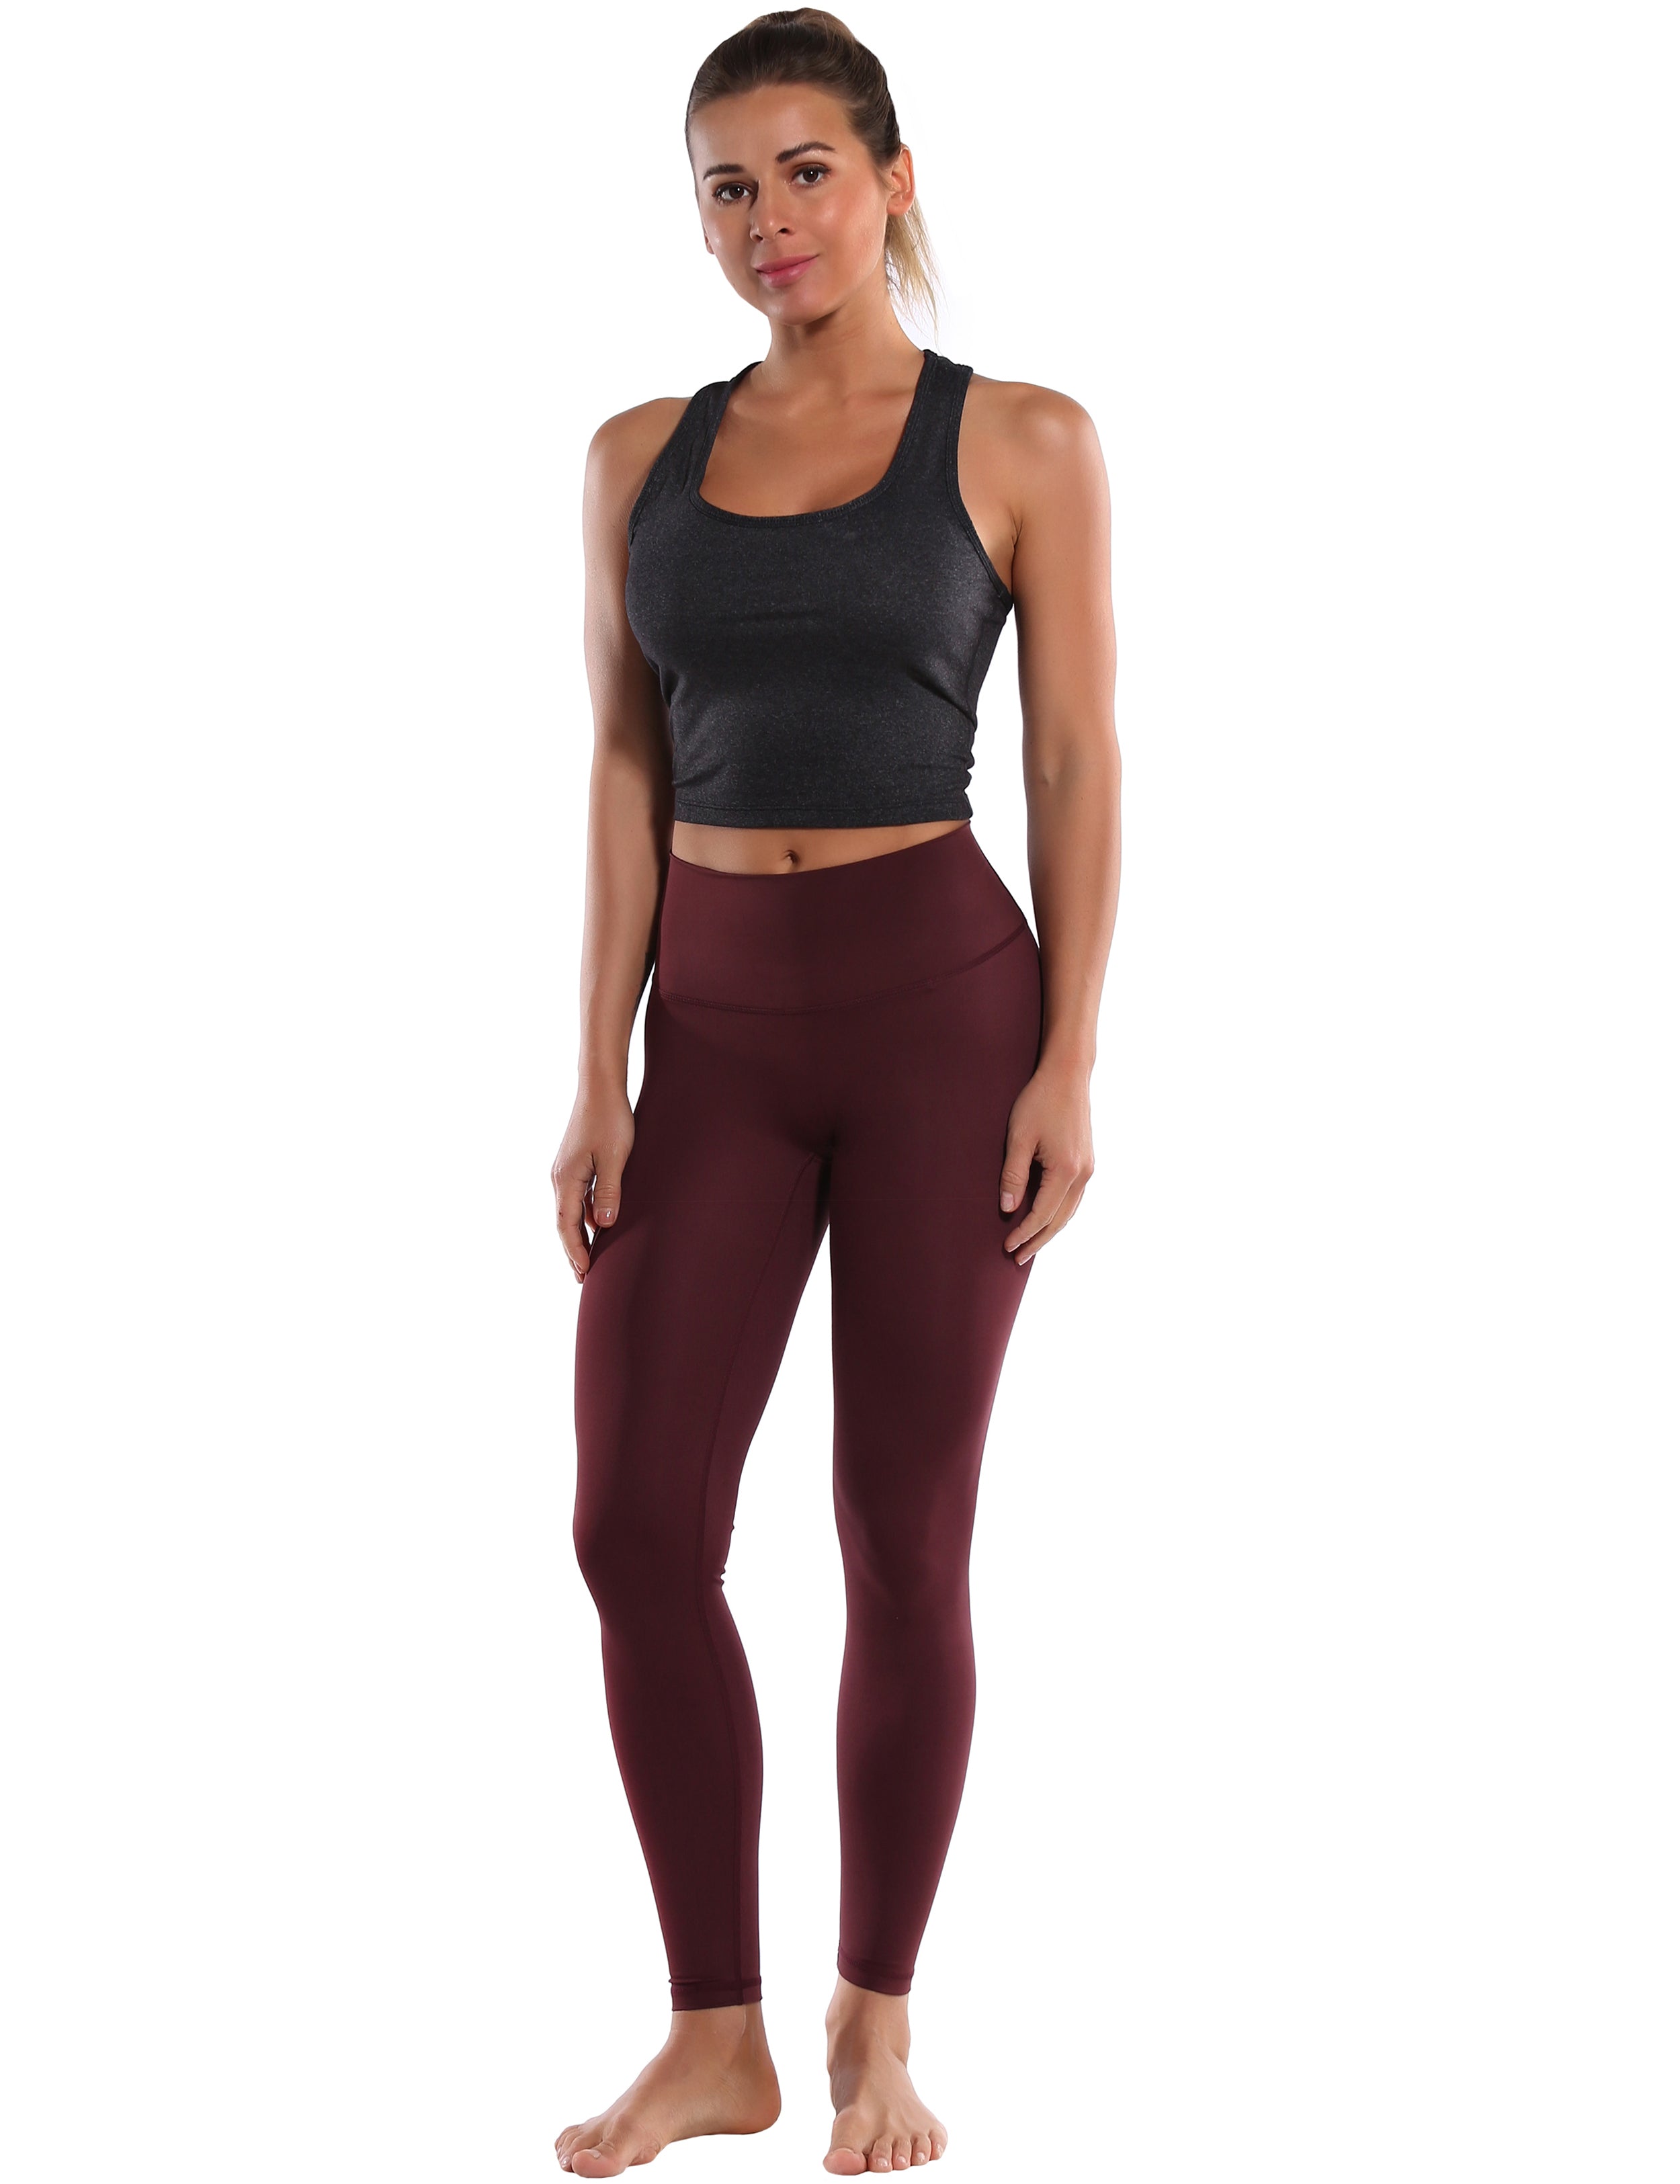 Racerback Athletic Crop Tank Tops heathercharcoal 92%Nylon/8%Spandex(Cotton Soft) Designed for Pilates Tight Fit So buttery soft, it feels weightless Sweat-wicking Four-way stretch Breathable Contours your body Sits below the waistband for moderate, everyday coverage